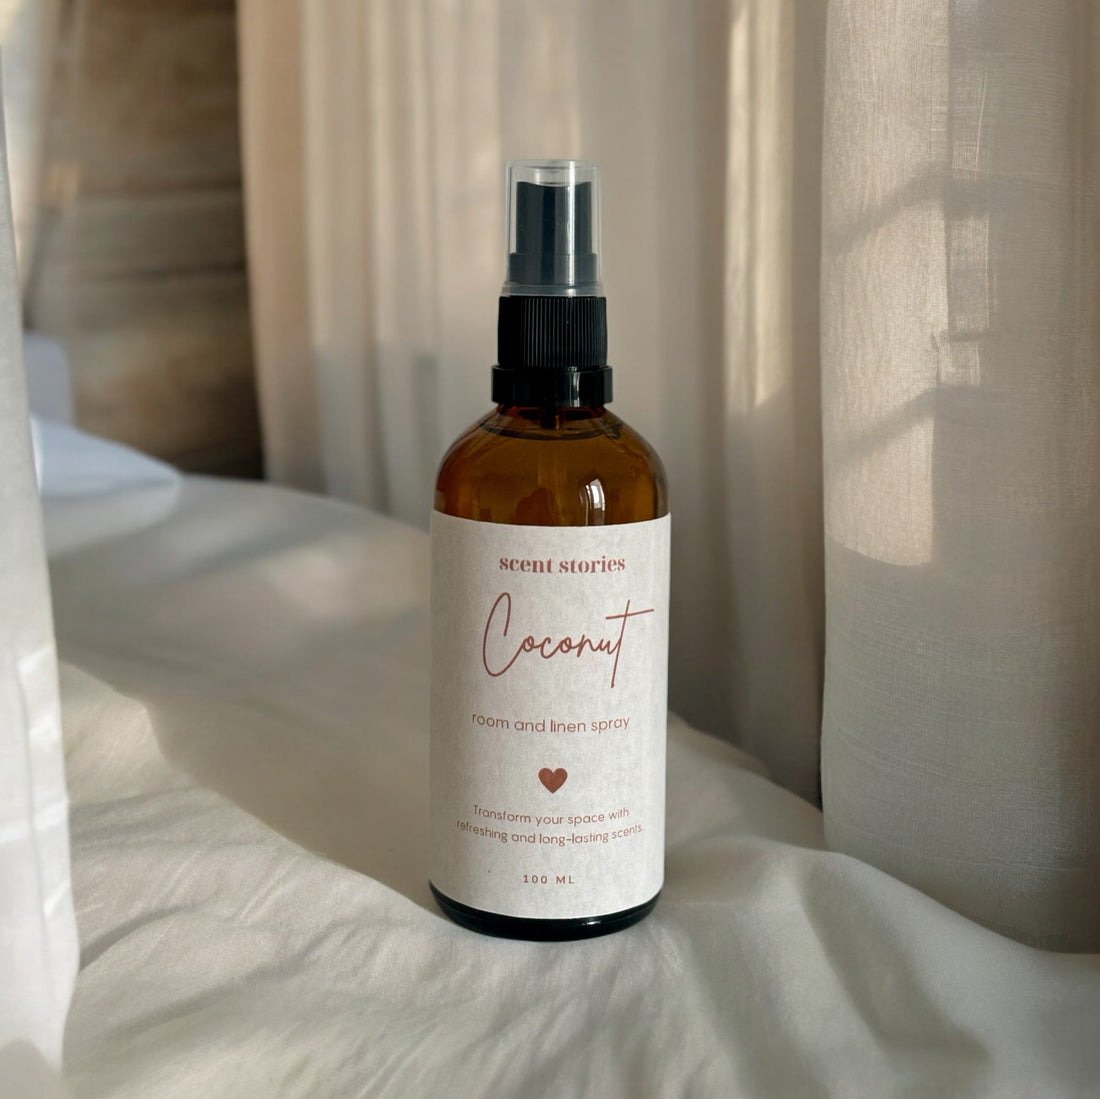 Coconut Room and Pillow Mist